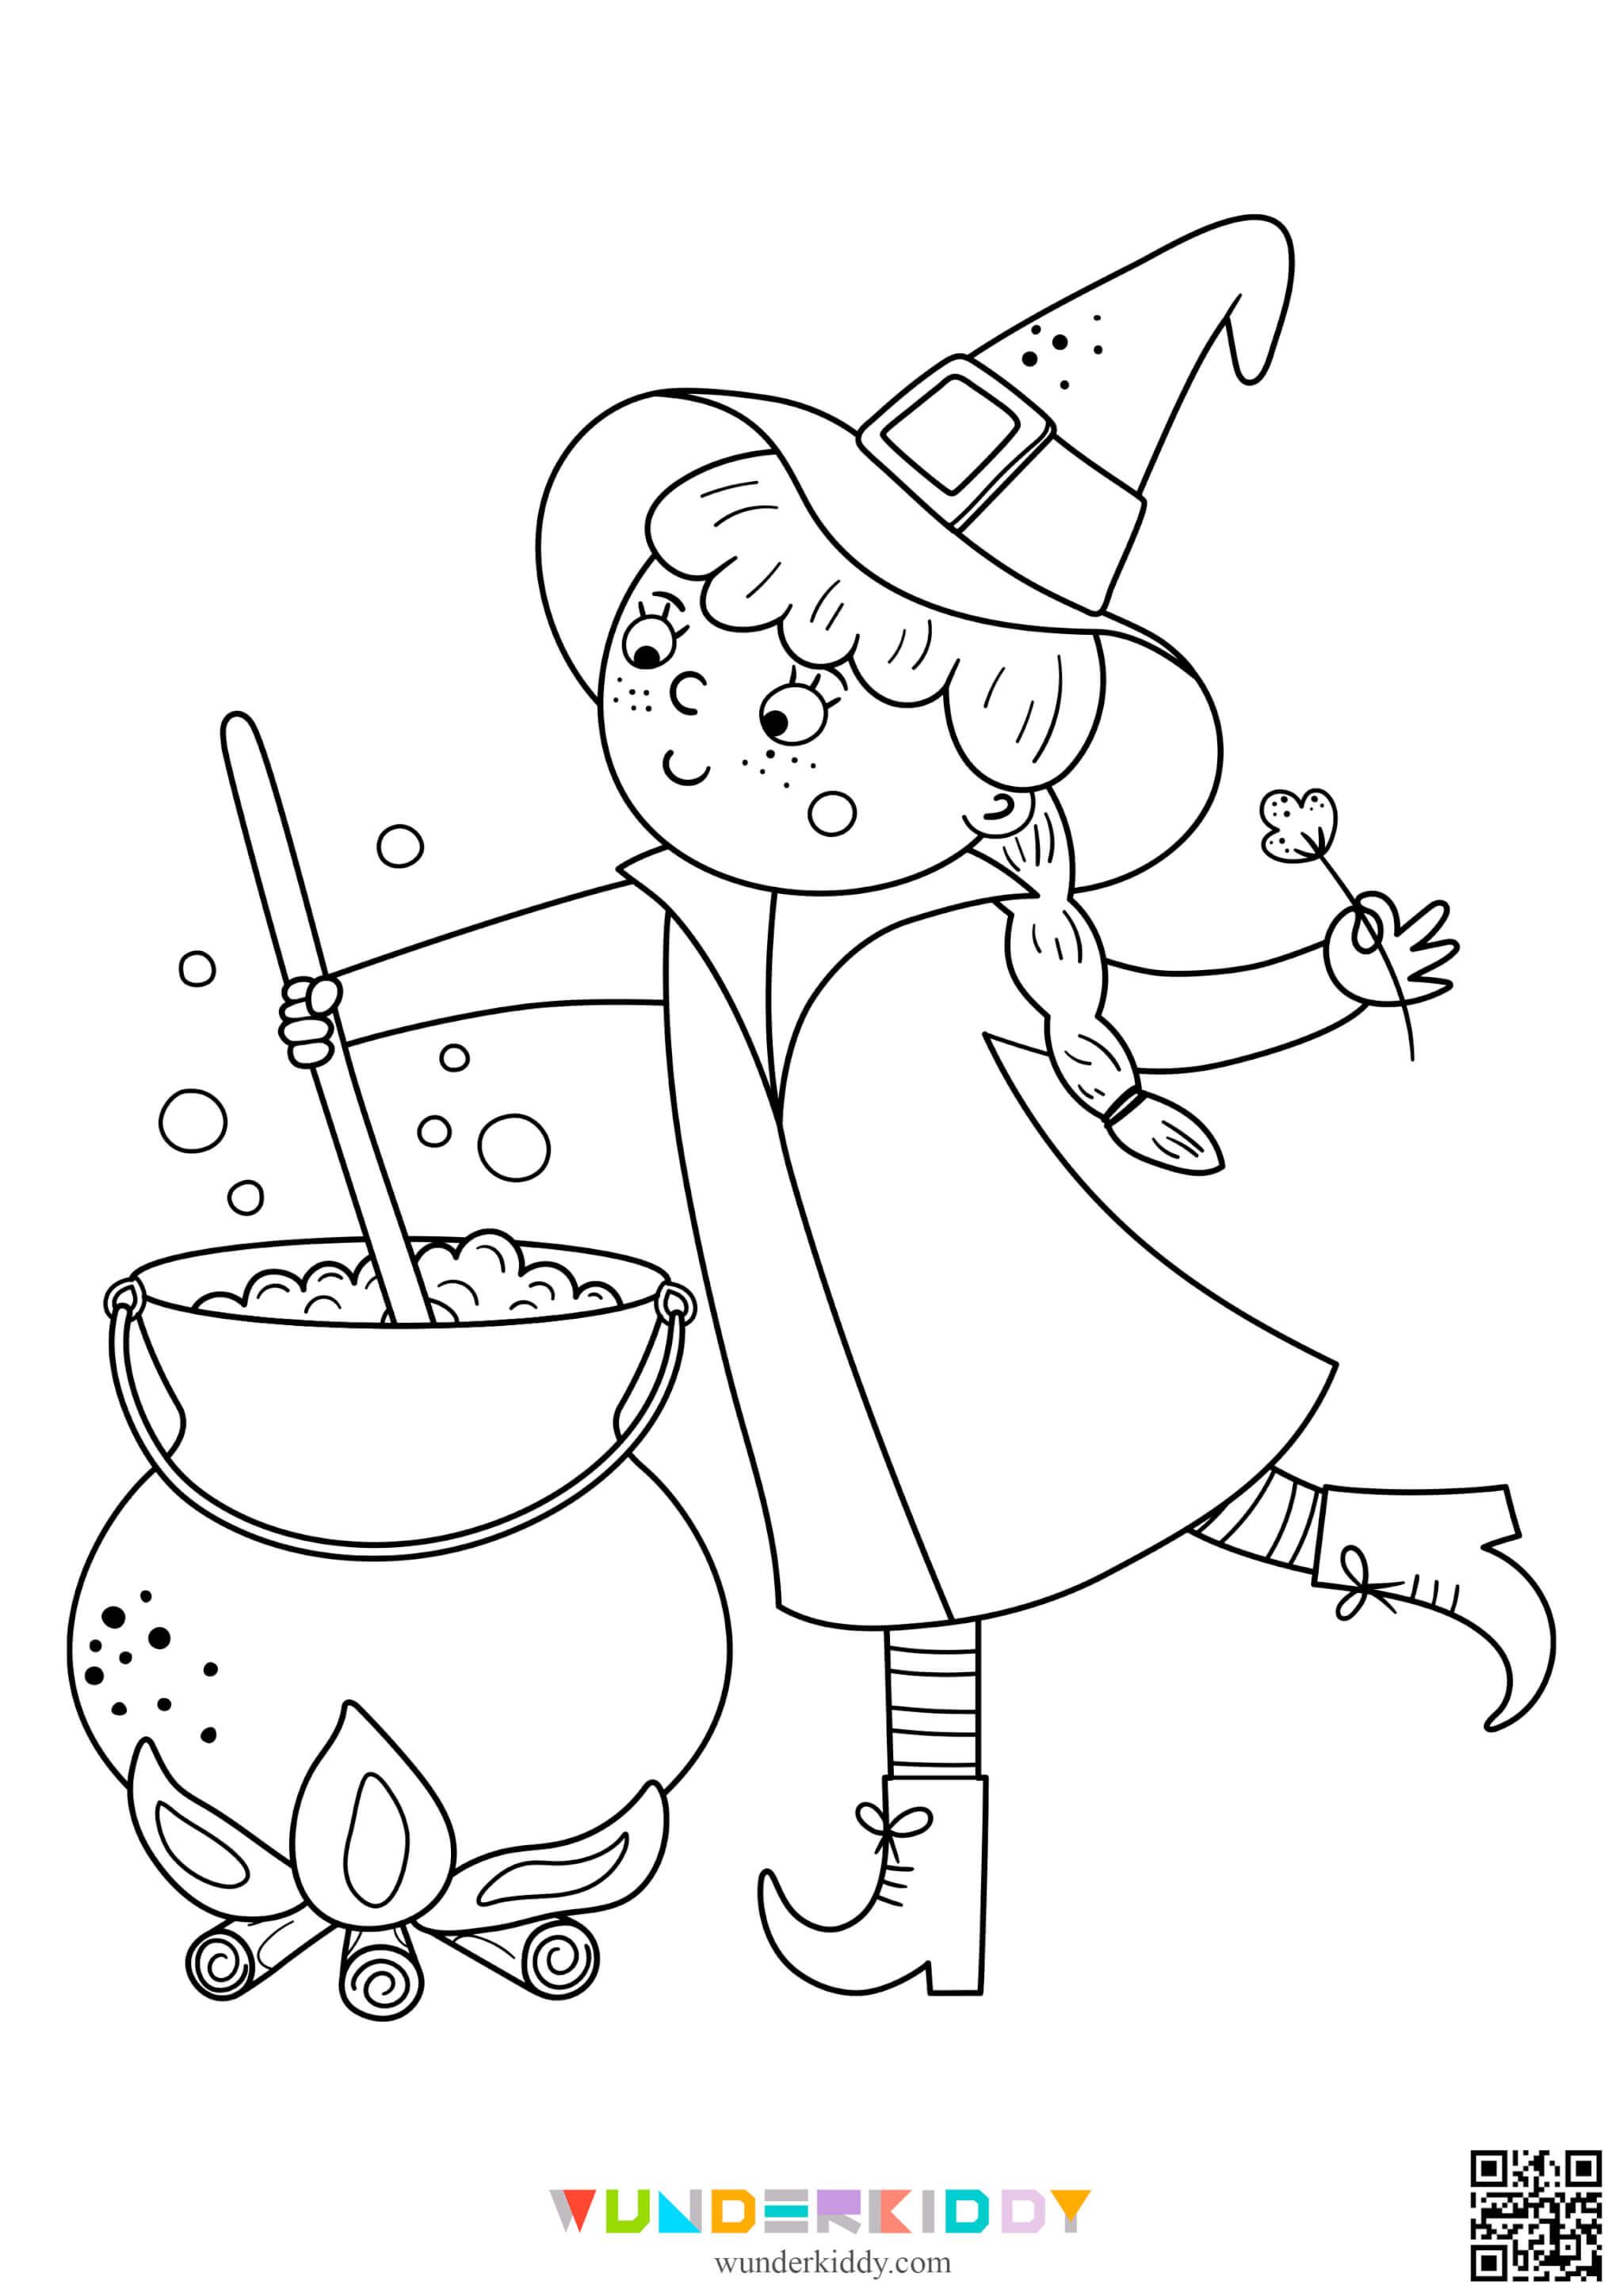 Halloween Coloring Pages - Image 2